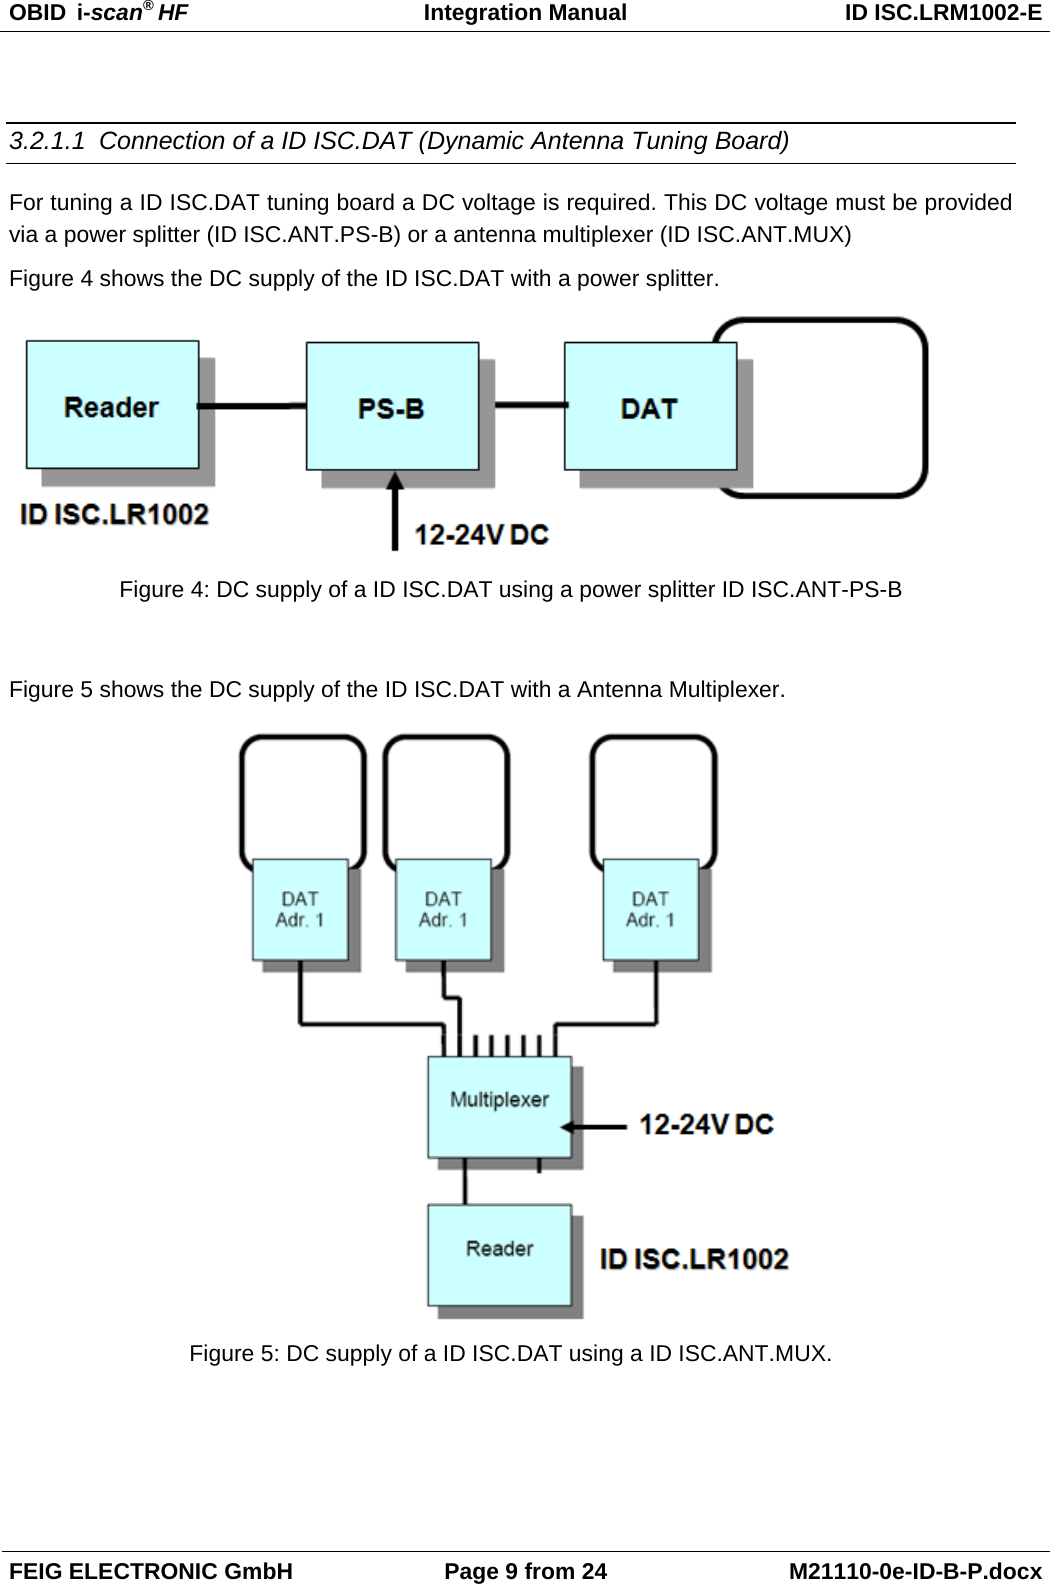 OBID  i-scan® HF Integration Manual ID ISC.LRM1002-E  FEIG ELECTRONIC GmbH Page 9 from 24 M21110-0e-ID-B-P.docx   3.2.1.1 Connection of a ID ISC.DAT (Dynamic Antenna Tuning Board) For tuning a ID ISC.DAT tuning board a DC voltage is required. This DC voltage must be provided via a power splitter (ID ISC.ANT.PS-B) or a antenna multiplexer (ID ISC.ANT.MUX) Figure 4 shows the DC supply of the ID ISC.DAT with a power splitter.  Figure 4: DC supply of a ID ISC.DAT using a power splitter ID ISC.ANT-PS-B  Figure 5 shows the DC supply of the ID ISC.DAT with a Antenna Multiplexer.  Figure 5: DC supply of a ID ISC.DAT using a ID ISC.ANT.MUX.  